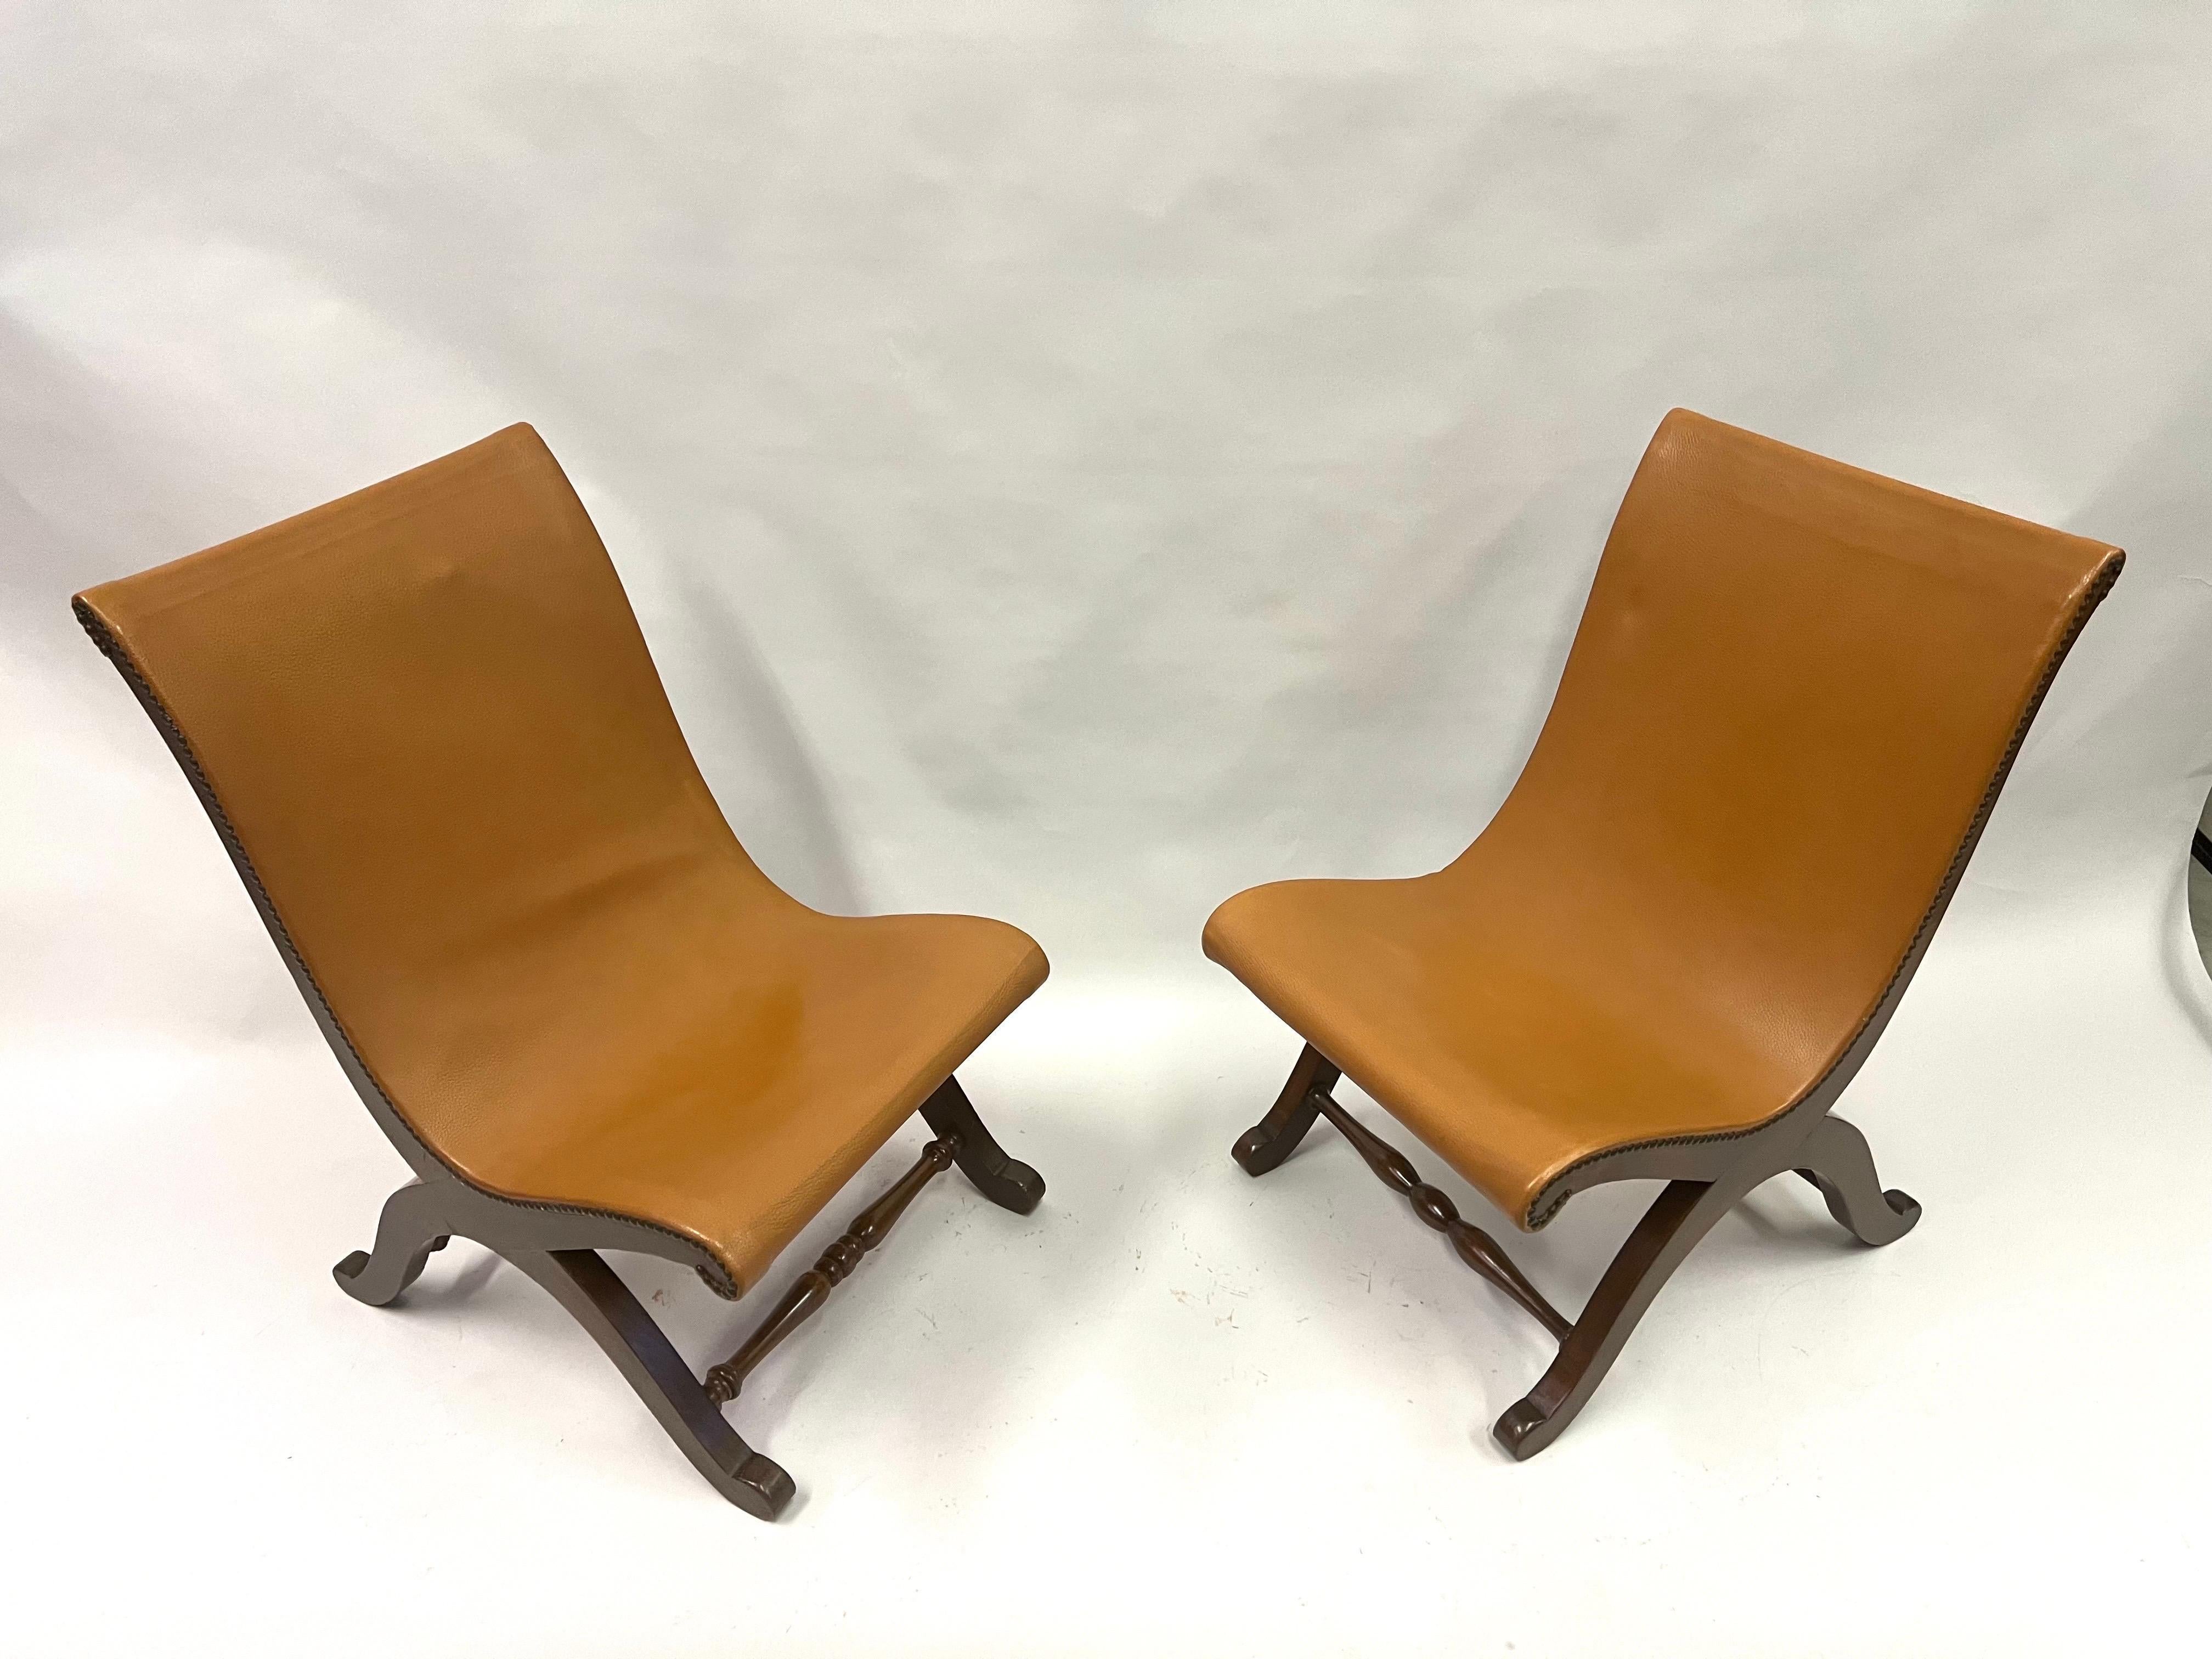 Hand-Carved Pair of French Modern Neoclassical Leather Lounge / Slipper Chairs, Andre Arbus For Sale